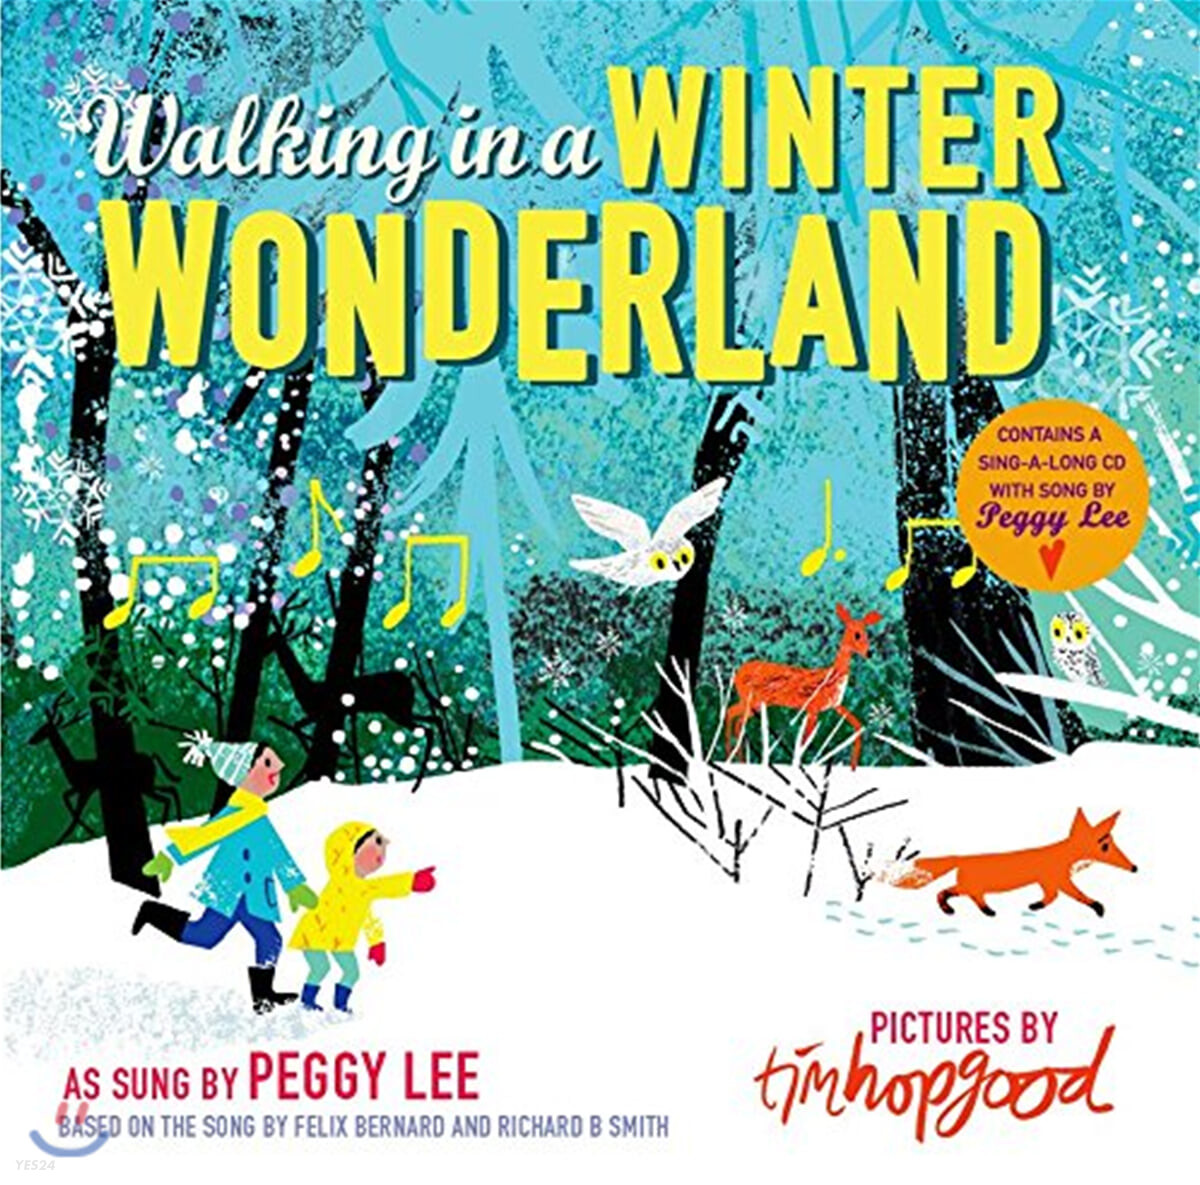 Walking in a winter wonderland : based on the song by Felix Bernard and Richard B Smith